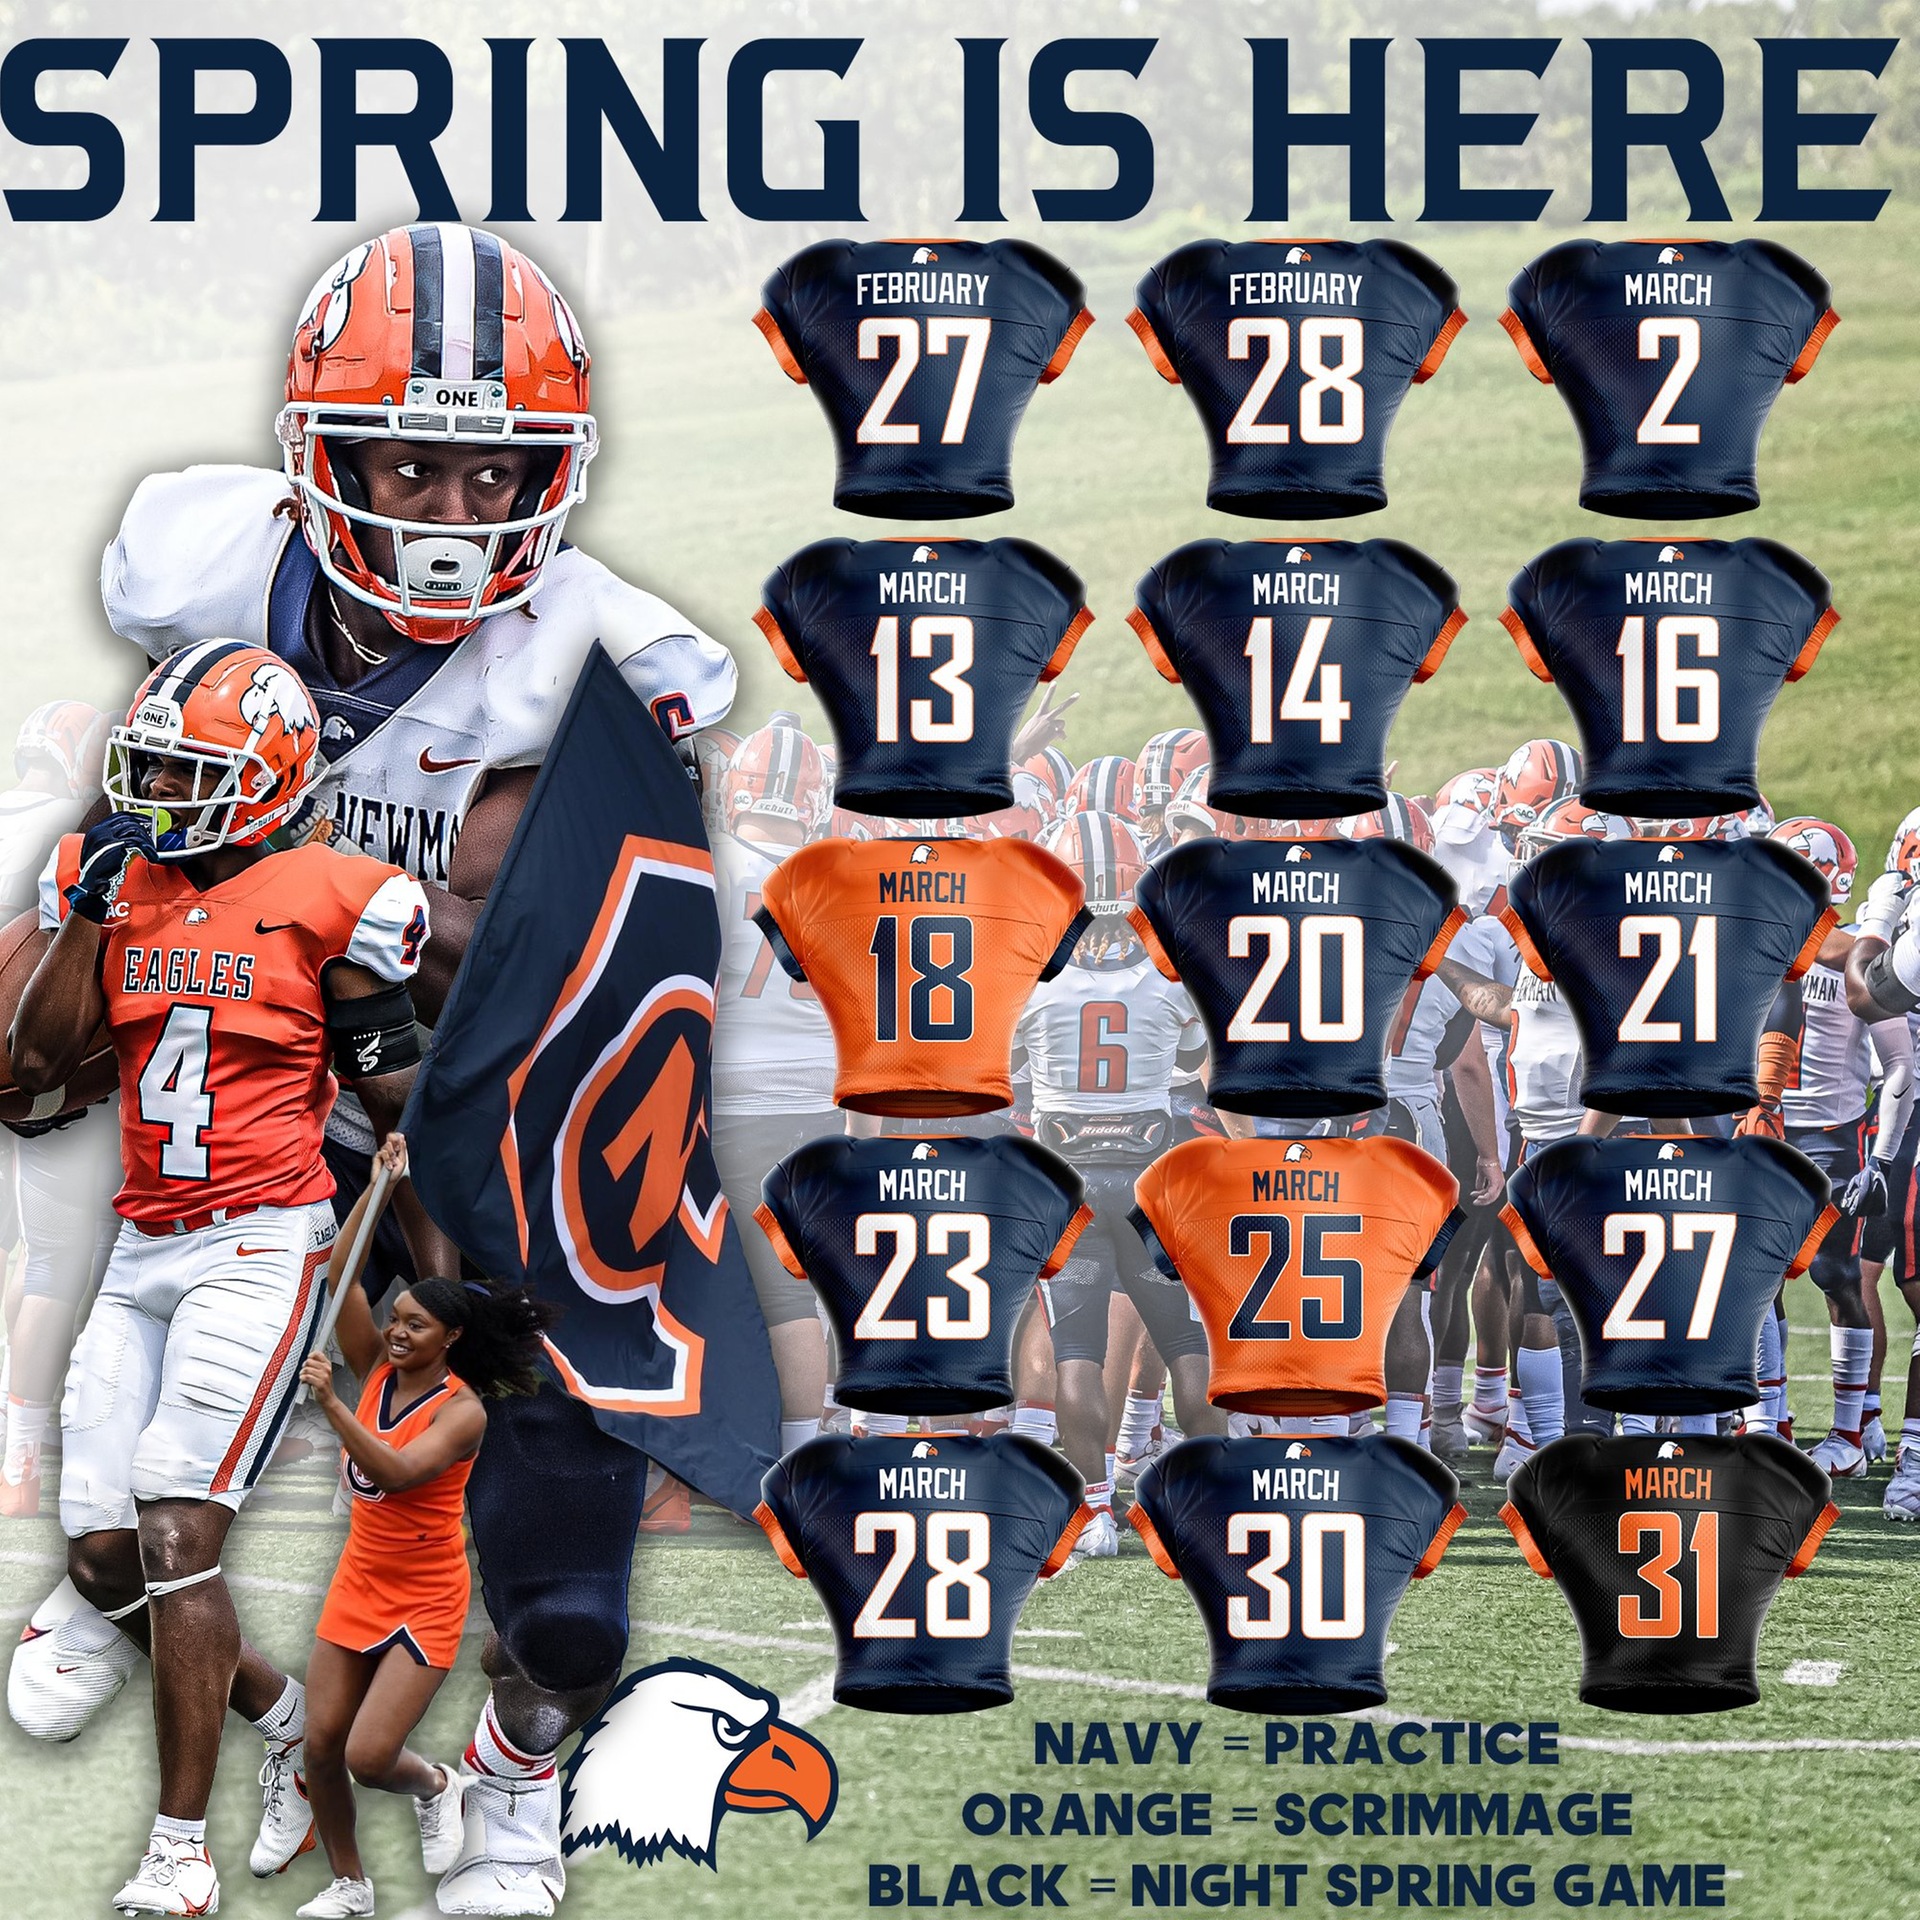 Football sets spring practice schedule